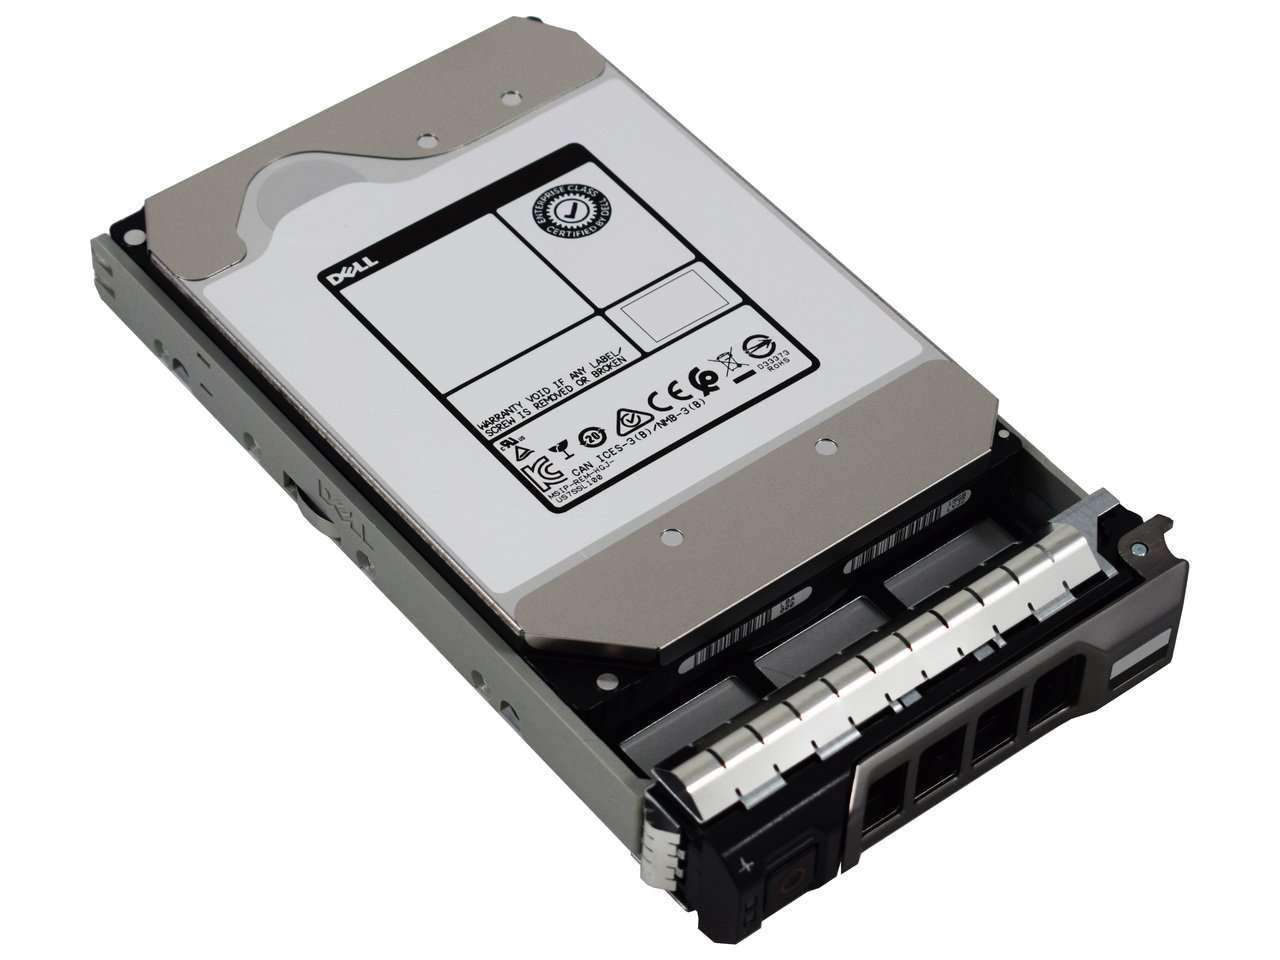 Dell G13 06P85J 4TB 7.2K RPM SAS 6Gb/s 512n 3.5" SED-FIPS Manufacturer Recertified HDD